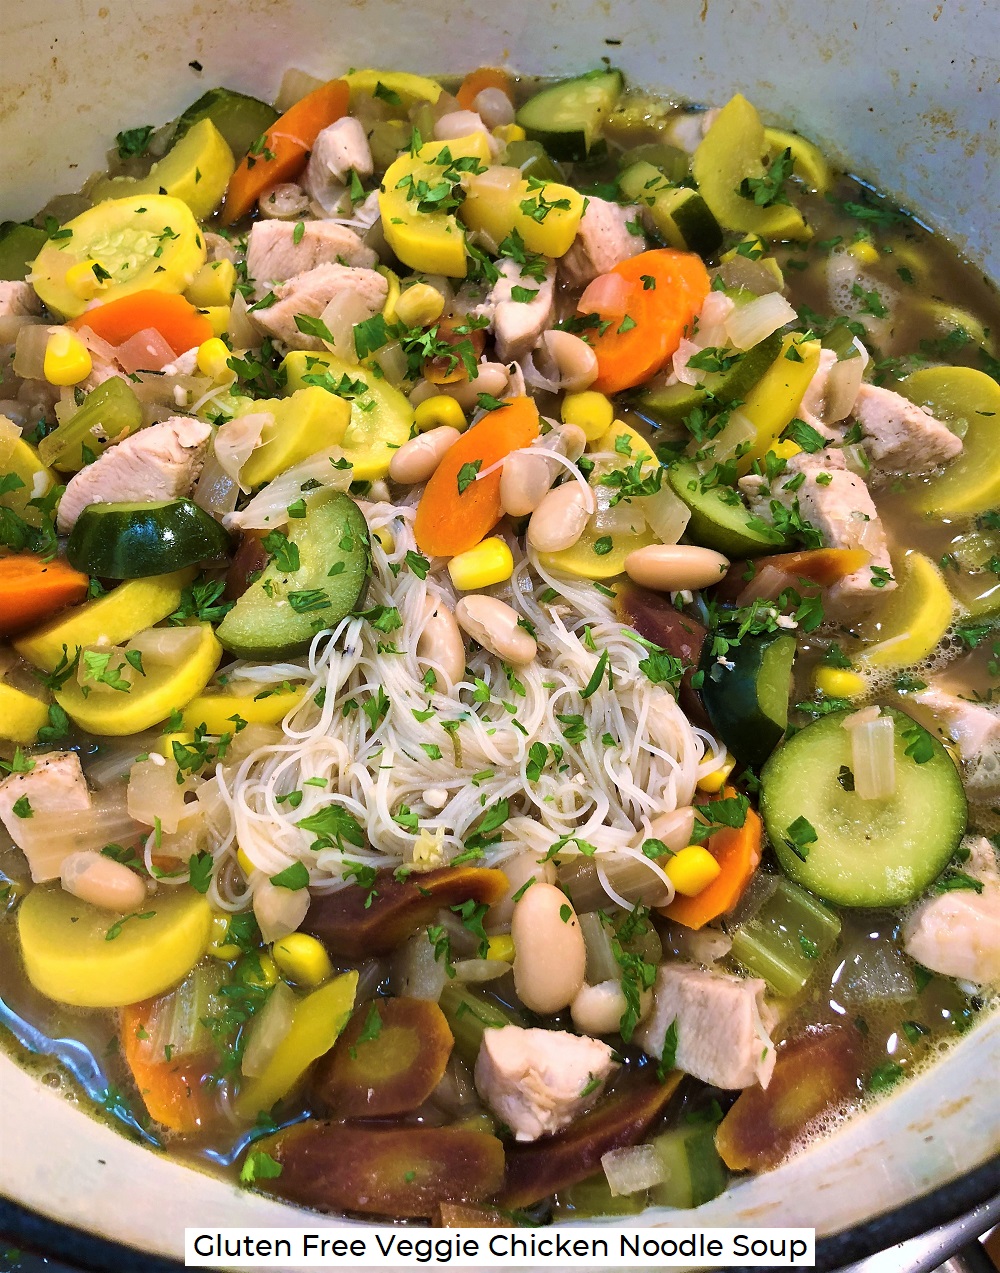 The BEST Gluten Free Chicken Noodle Soup Recipe with Vegan Options